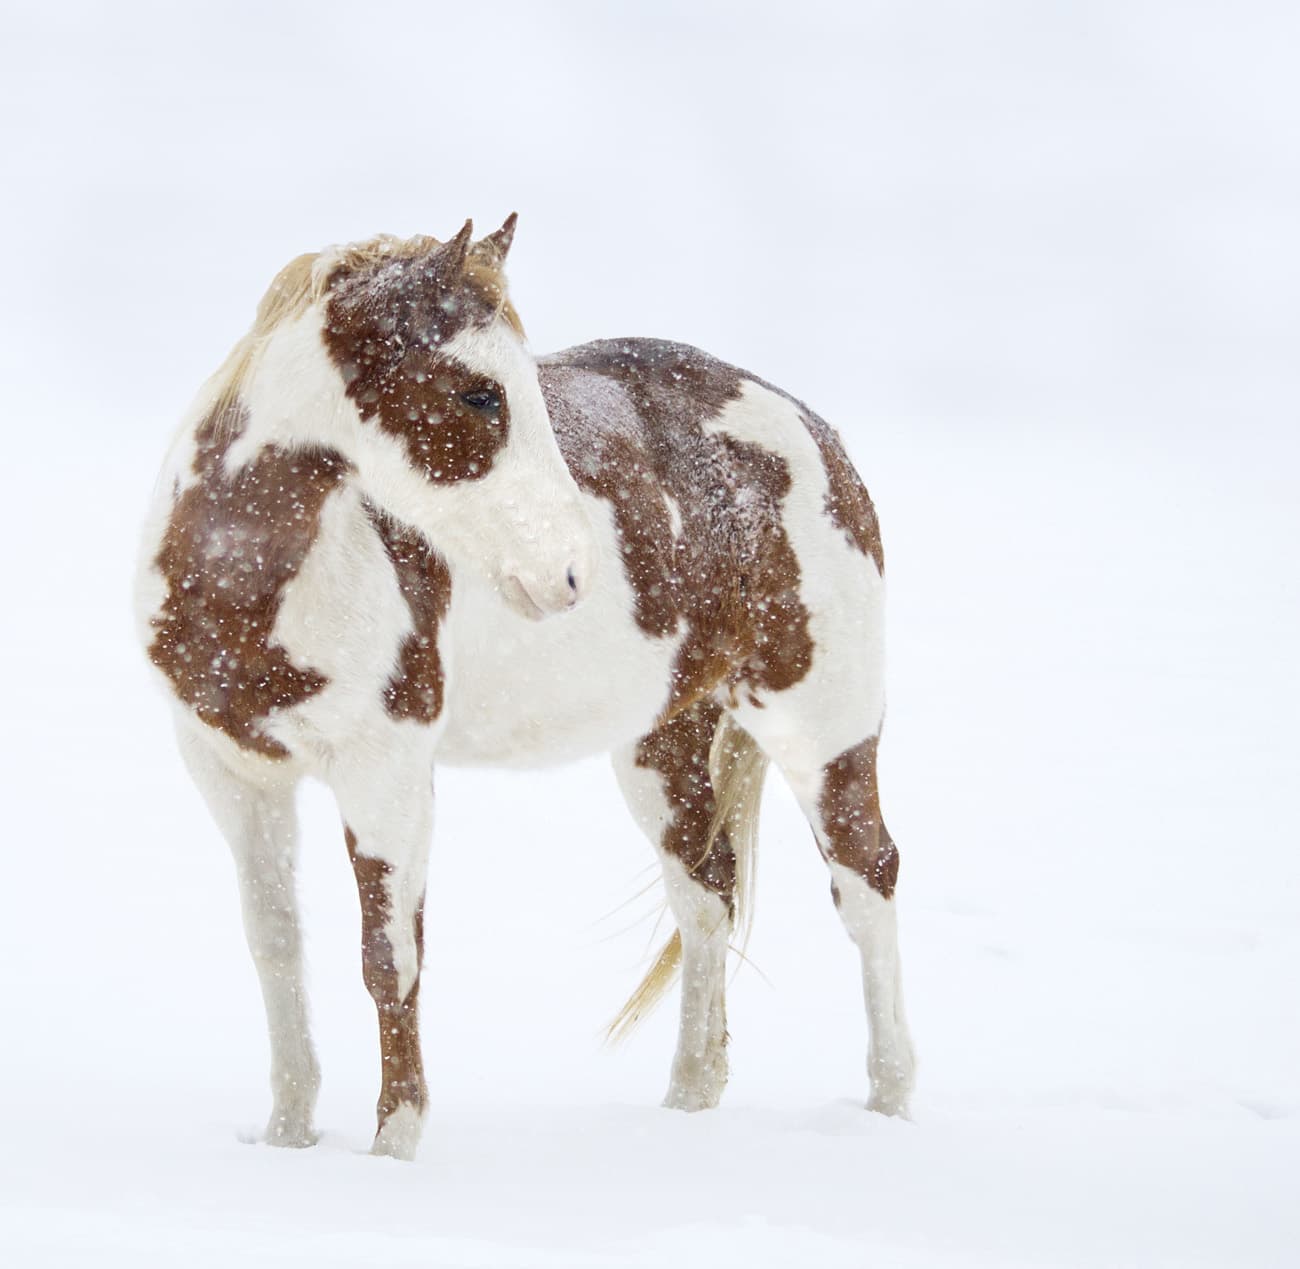 A pinto horse standing in a snowy field while snow is falling.